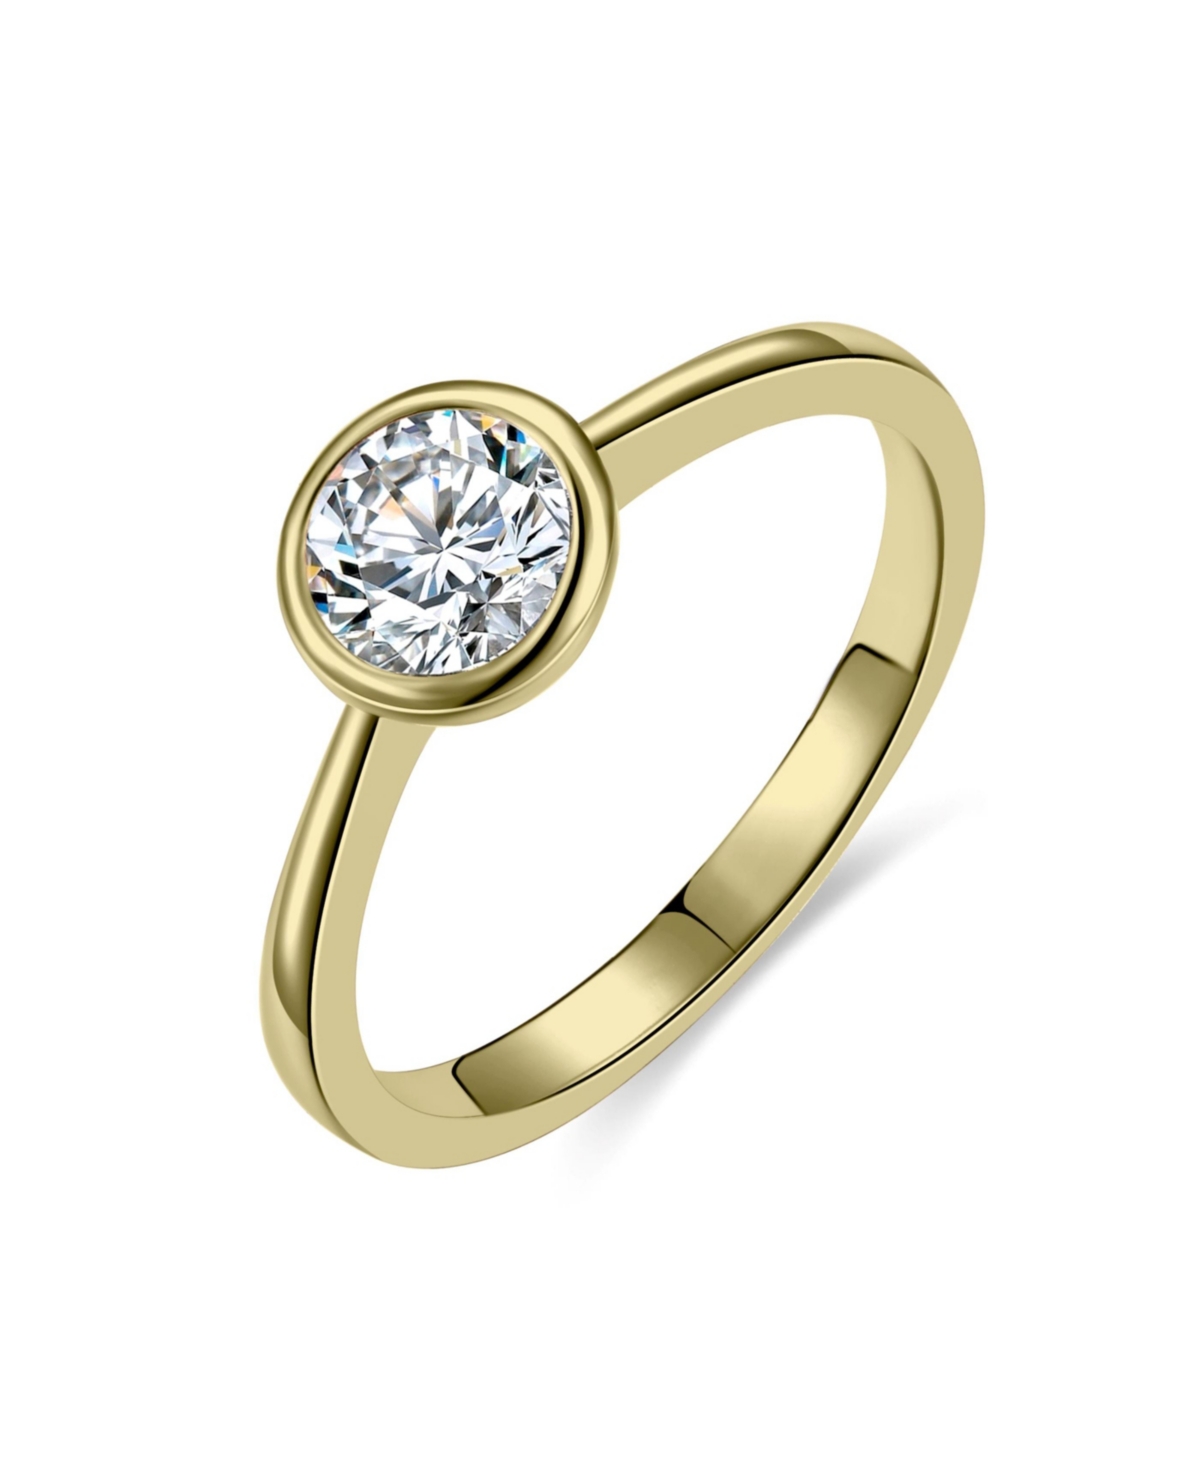 RACHEL GLAUBER RA 14K GOLD PLATED WITH CUBIC ZIRCONIA MODERN BEZEL PROMISE ENGAGEMENT RING